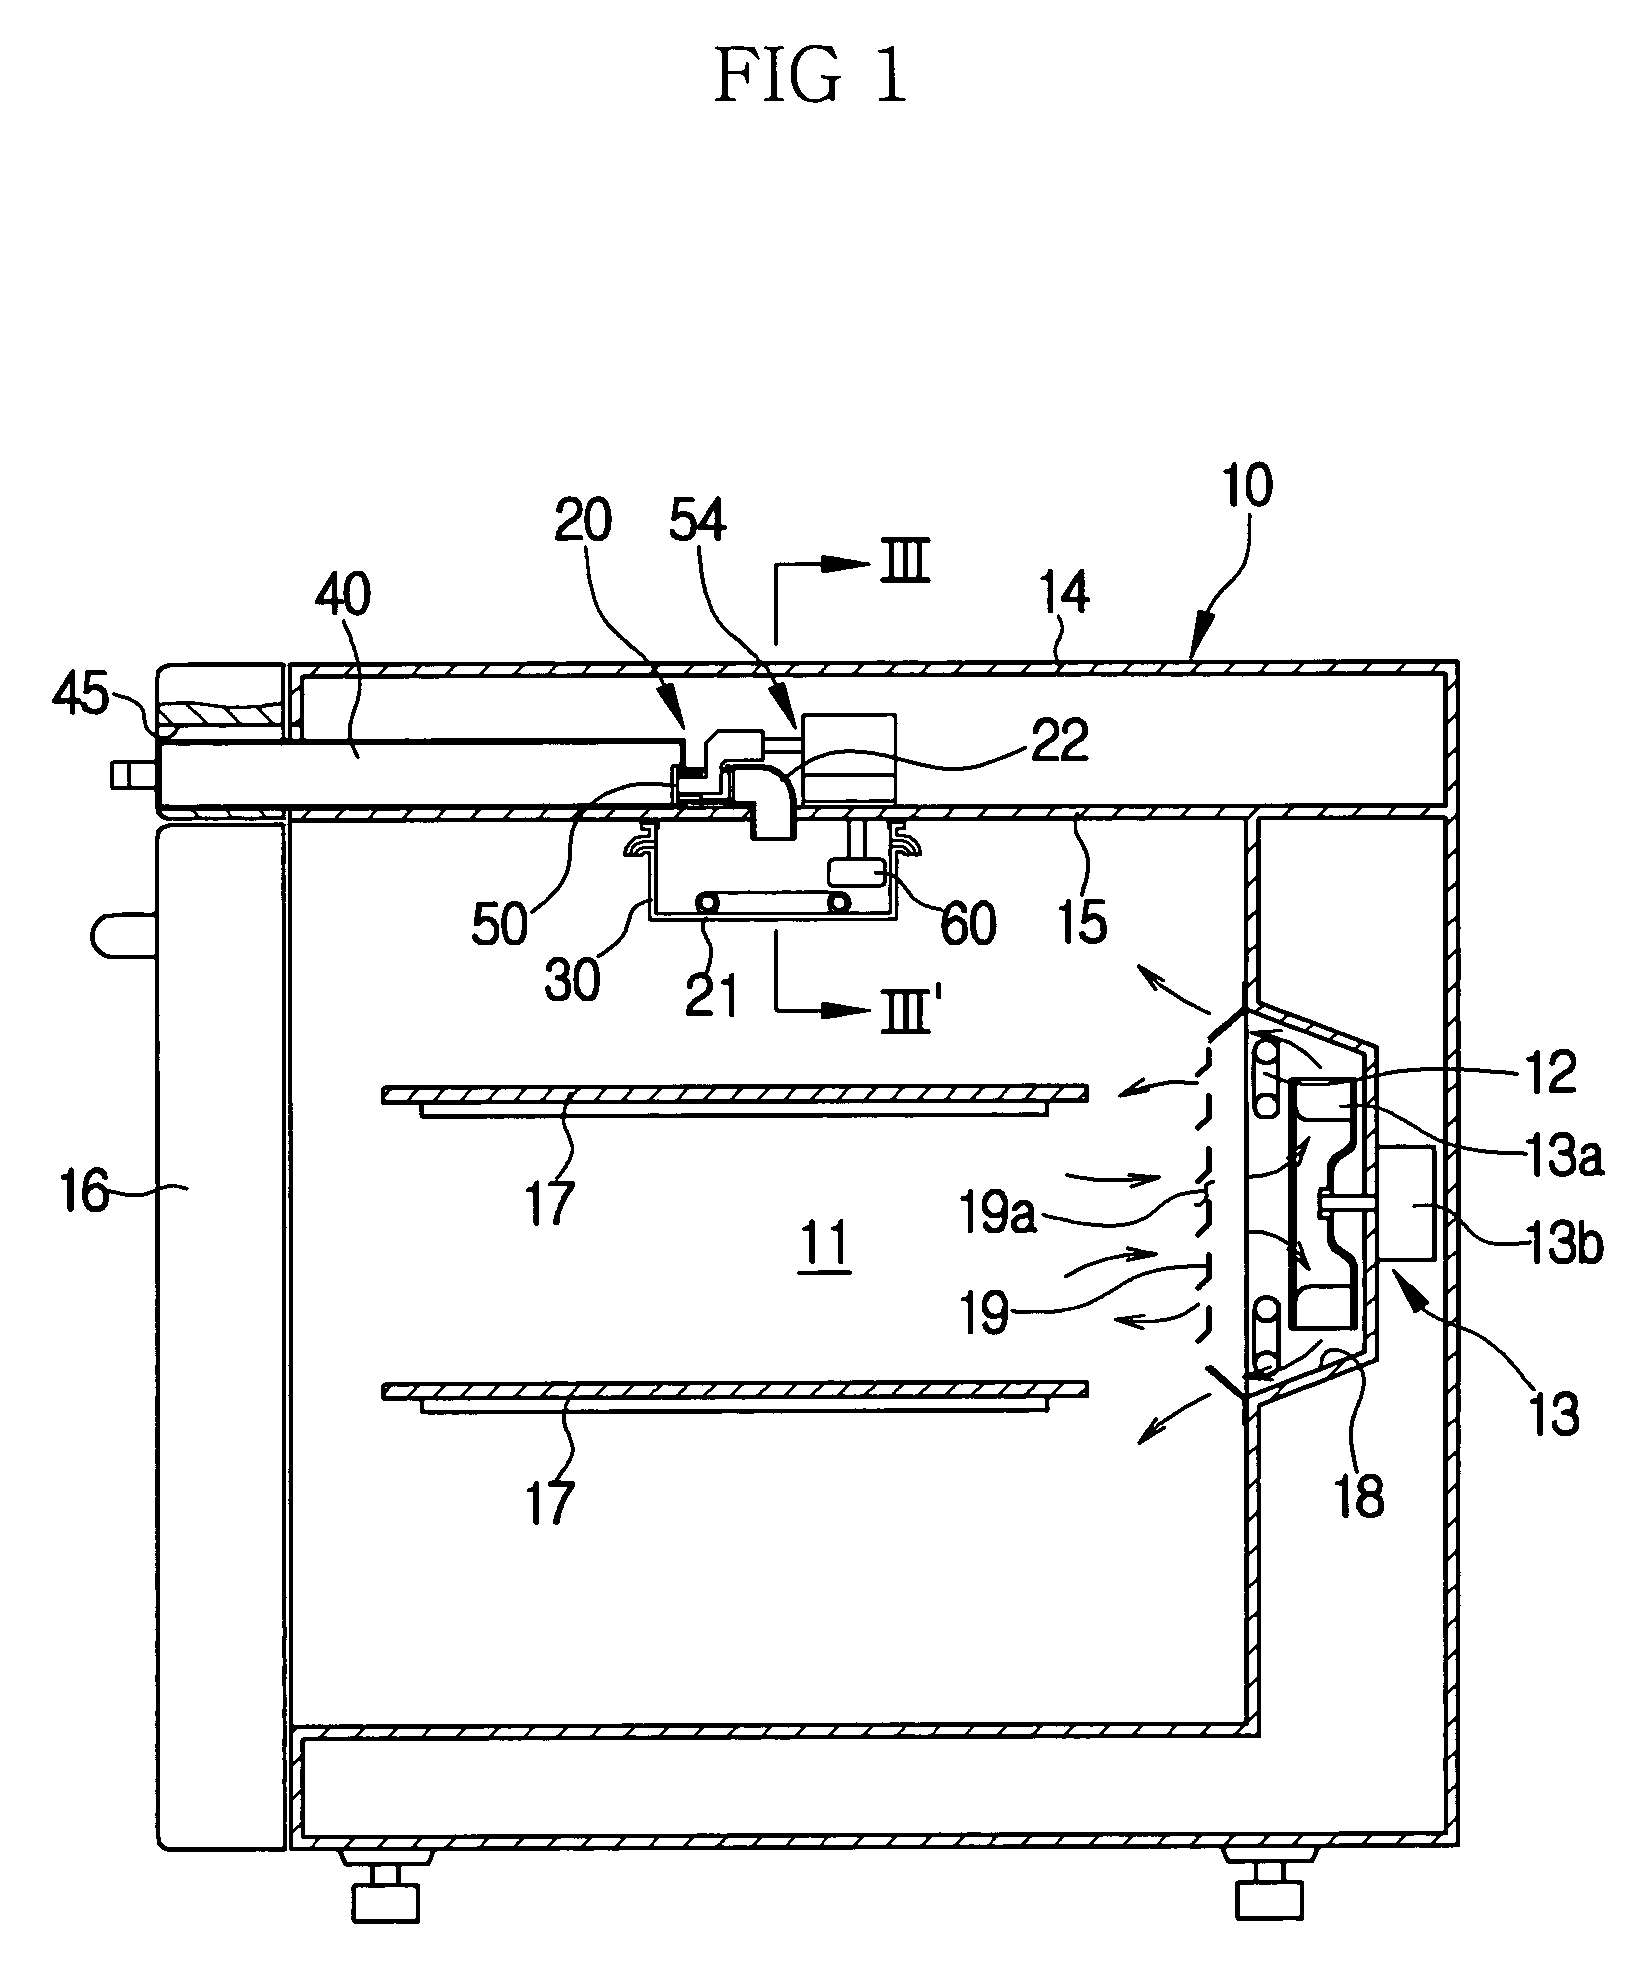 Heating cooker having a steam generating unit